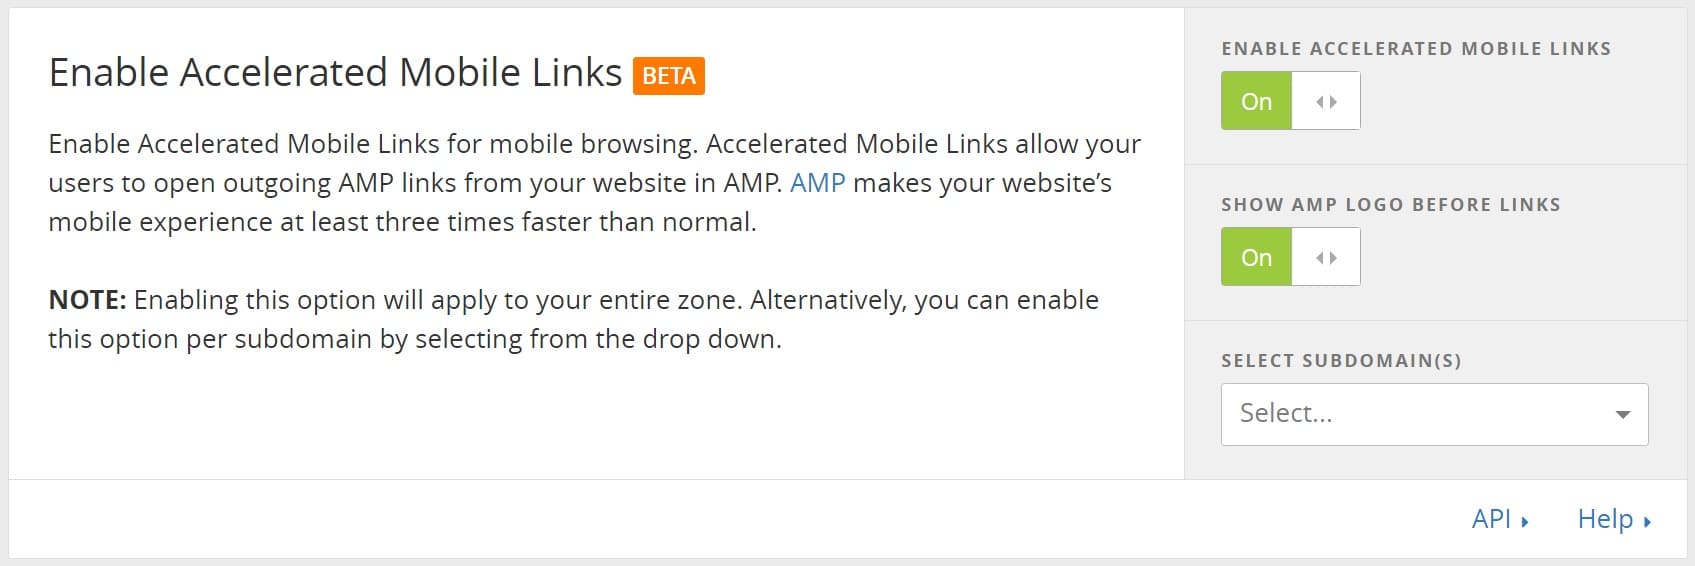 cloudflare accelerated mobile links